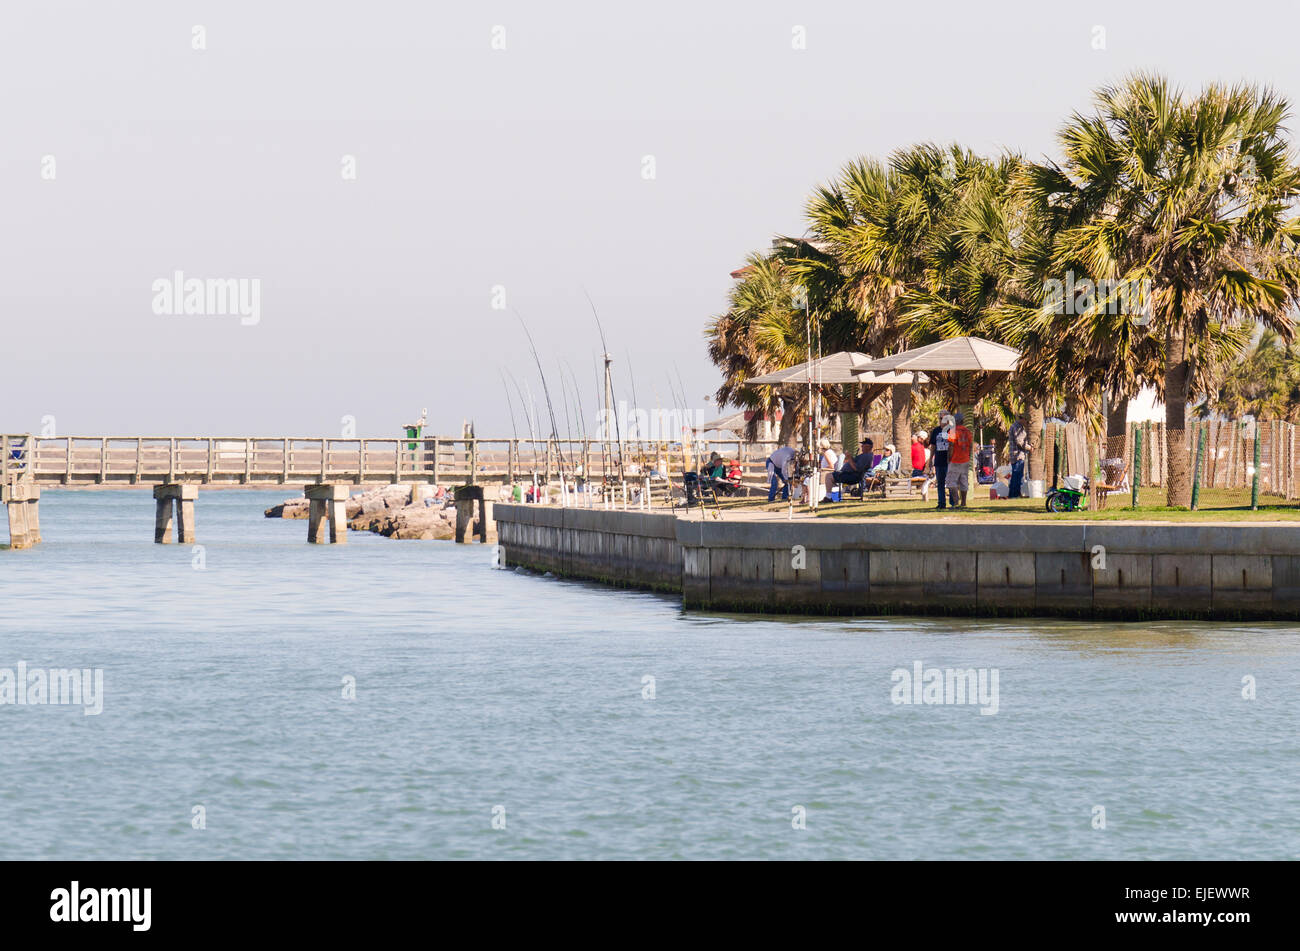 The fishing poles of Retired Senior citizens line the waterfront in Port Aransas Texas Stock Photo